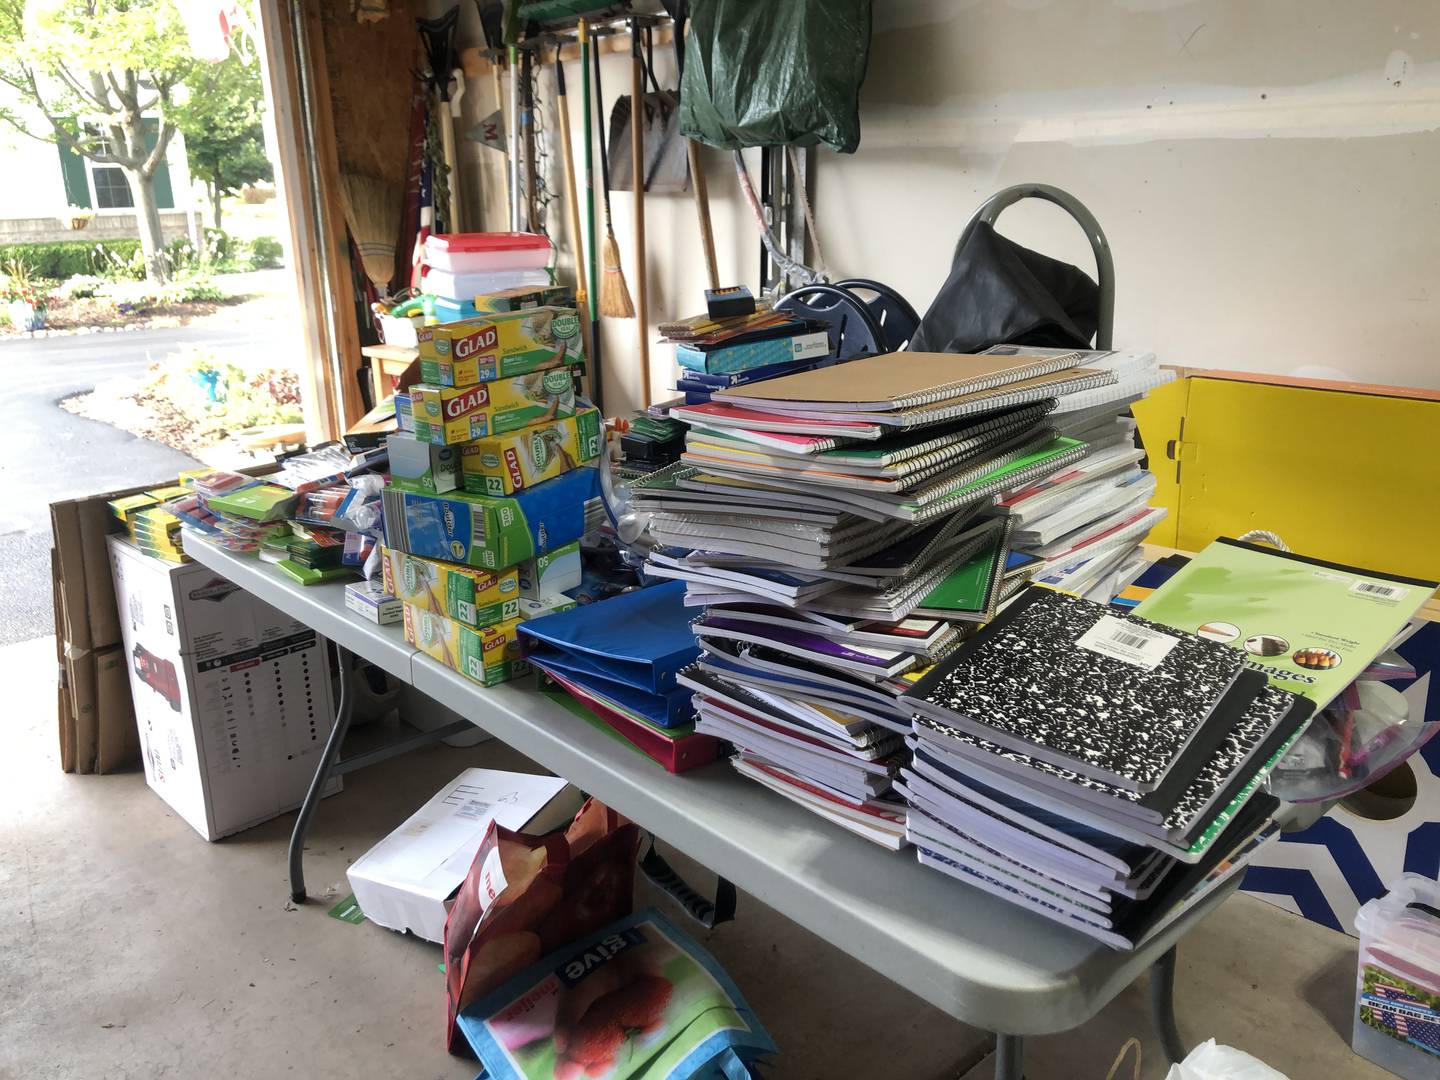 The singles club at Carillon Lakes recently collected 11 boxes of school supplies from Carillon Lakes residents.